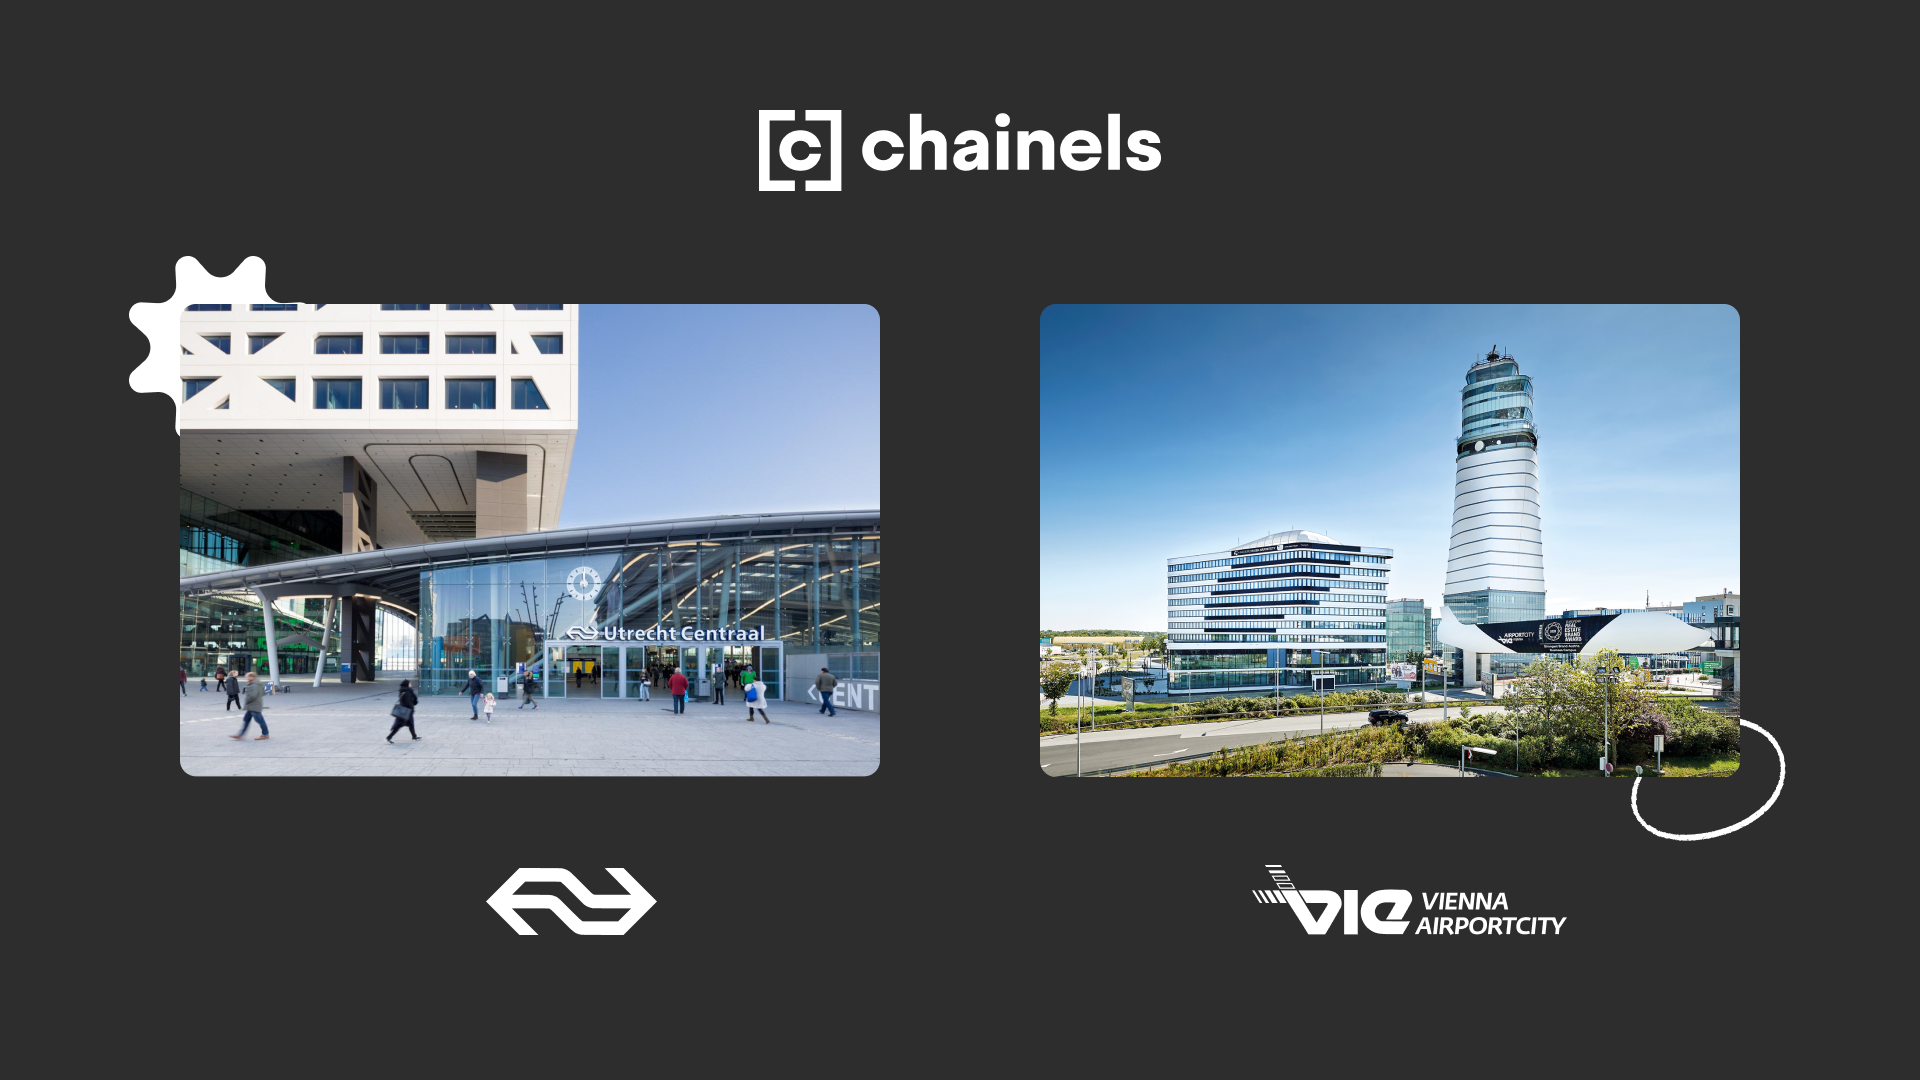 NS stations & Vienna Airport city use chainels 